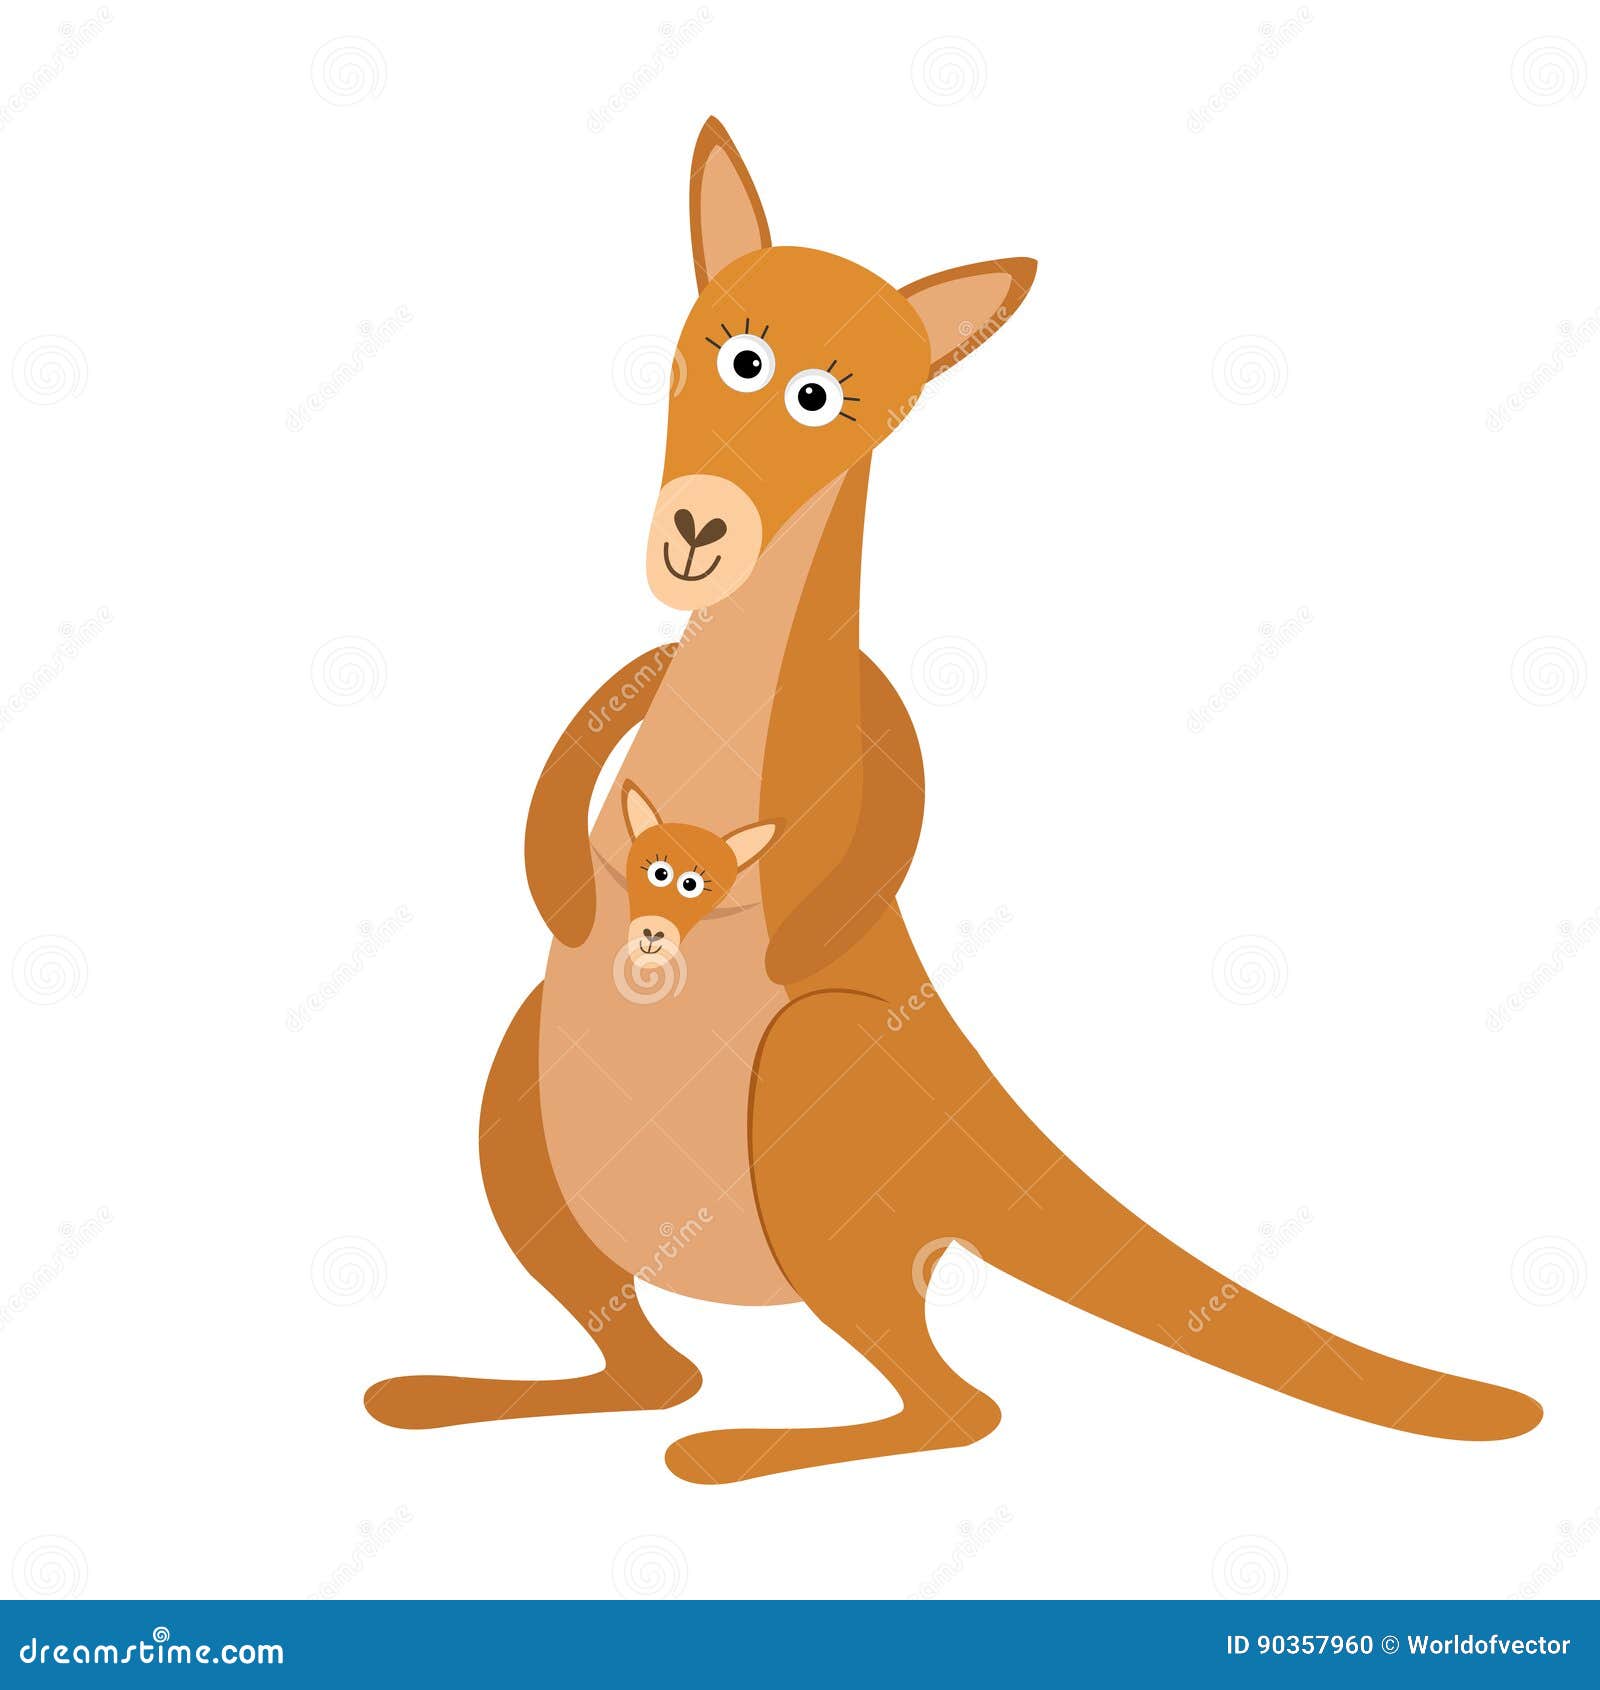 Kangaroo Mom With Baby In The Pocket Pouch. Cute Cartoon Character.  Australia Marsupial Animal. Education Card For Kids. Flat Desi Illustration  90357960 - Megapixl